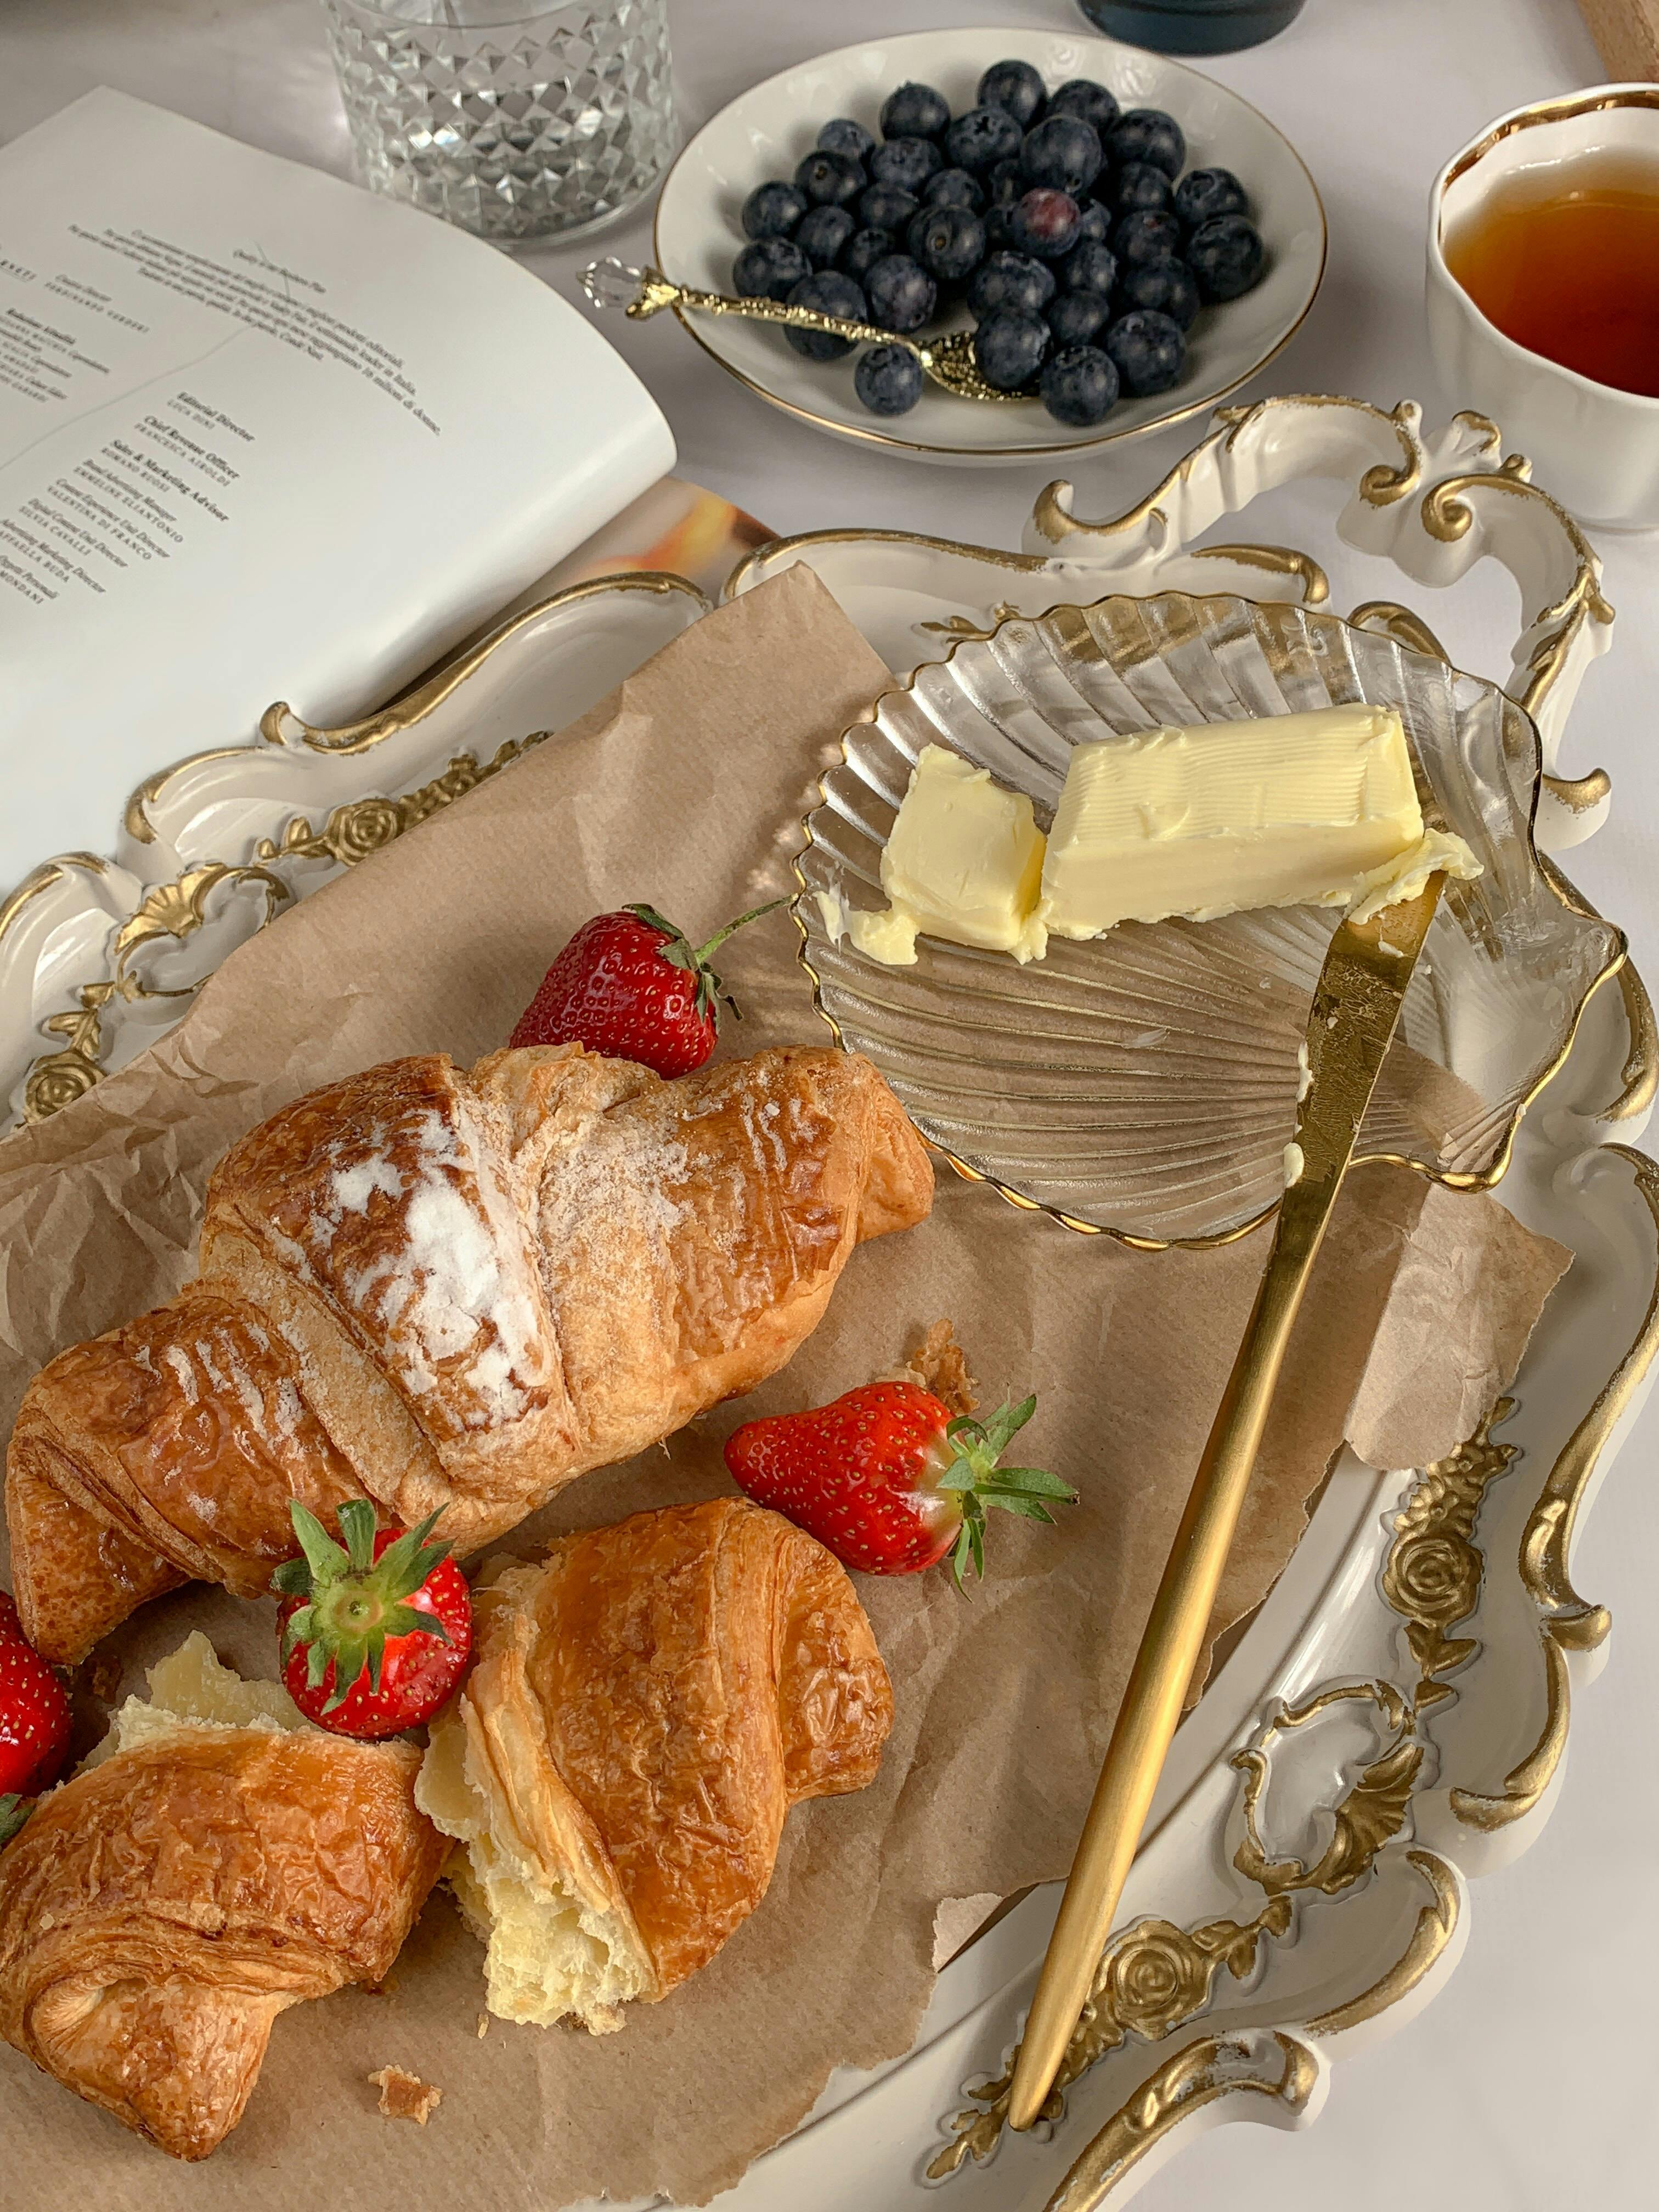 High tea setting with fresh croissants, strawberries, blueberries on a golden tray, butter on a glass dish with a gold knife, and a cup of tea with a menu in the background.